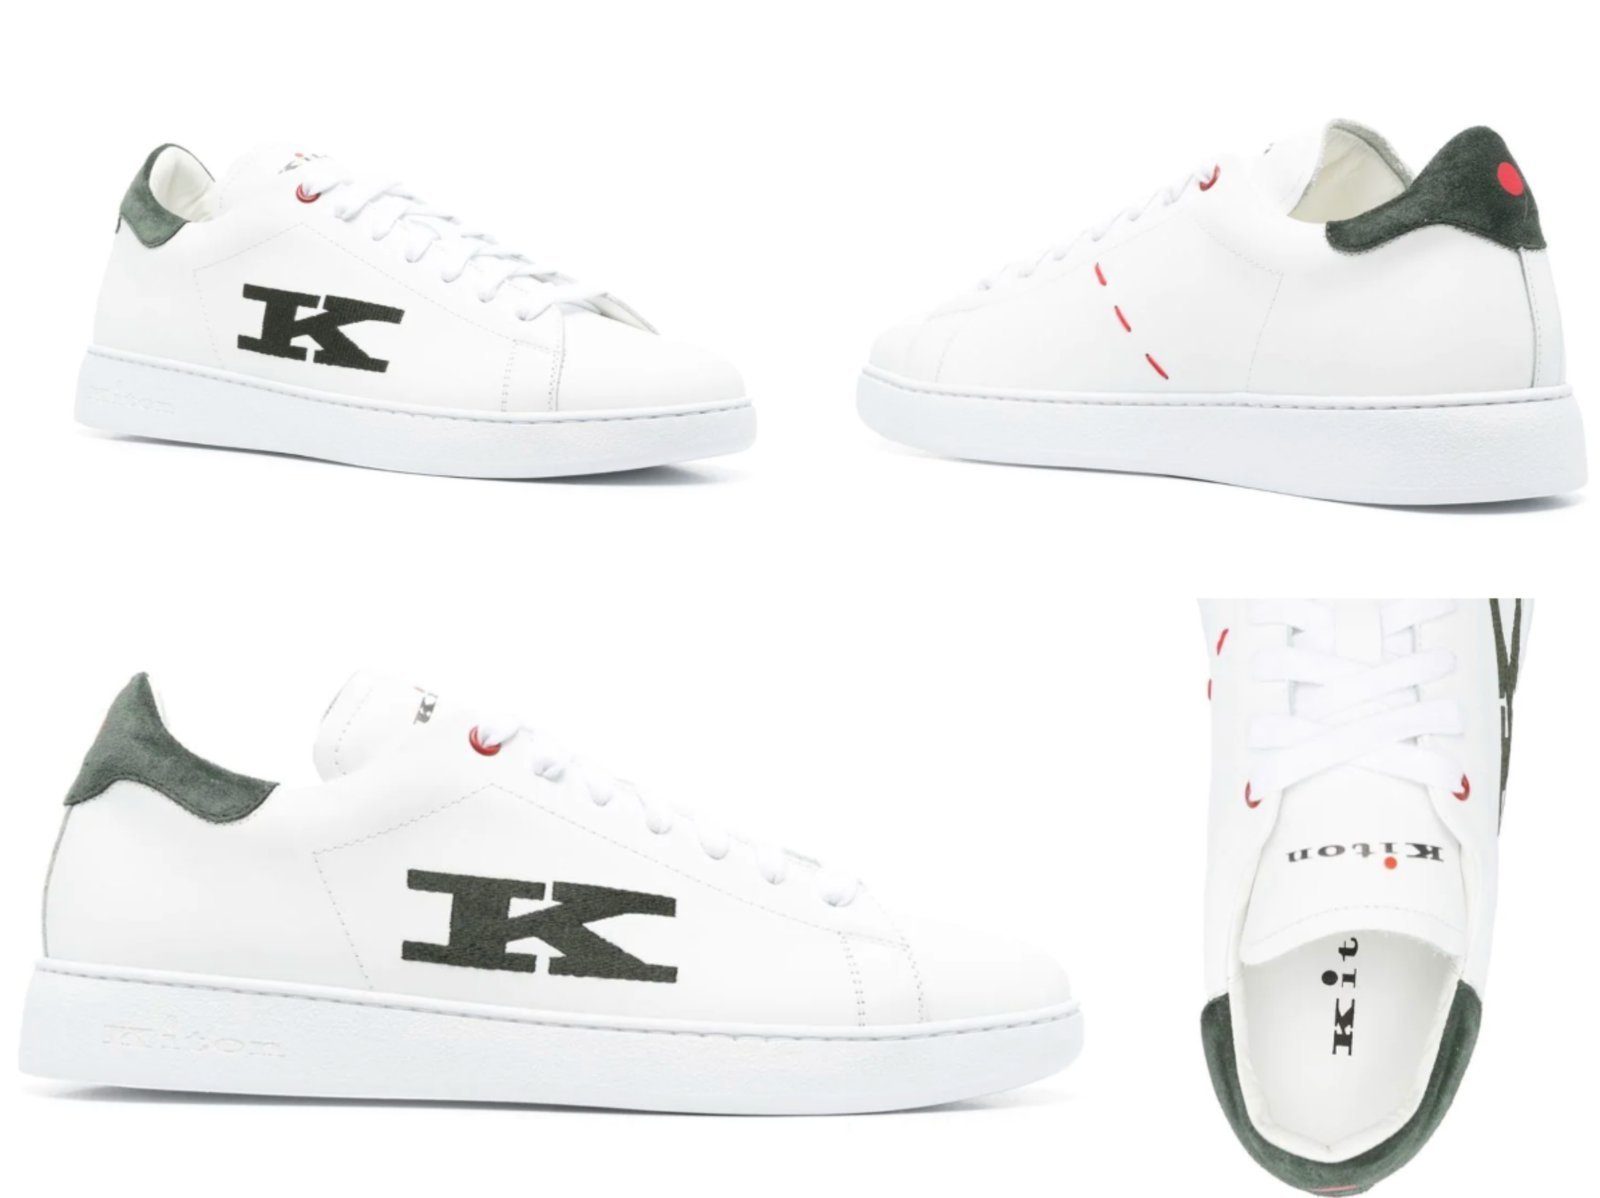 Kiton KITON Top-Stitched K Logo Ciro Paone Sneakers Runners Schuhe Shoes Tra Sneaker